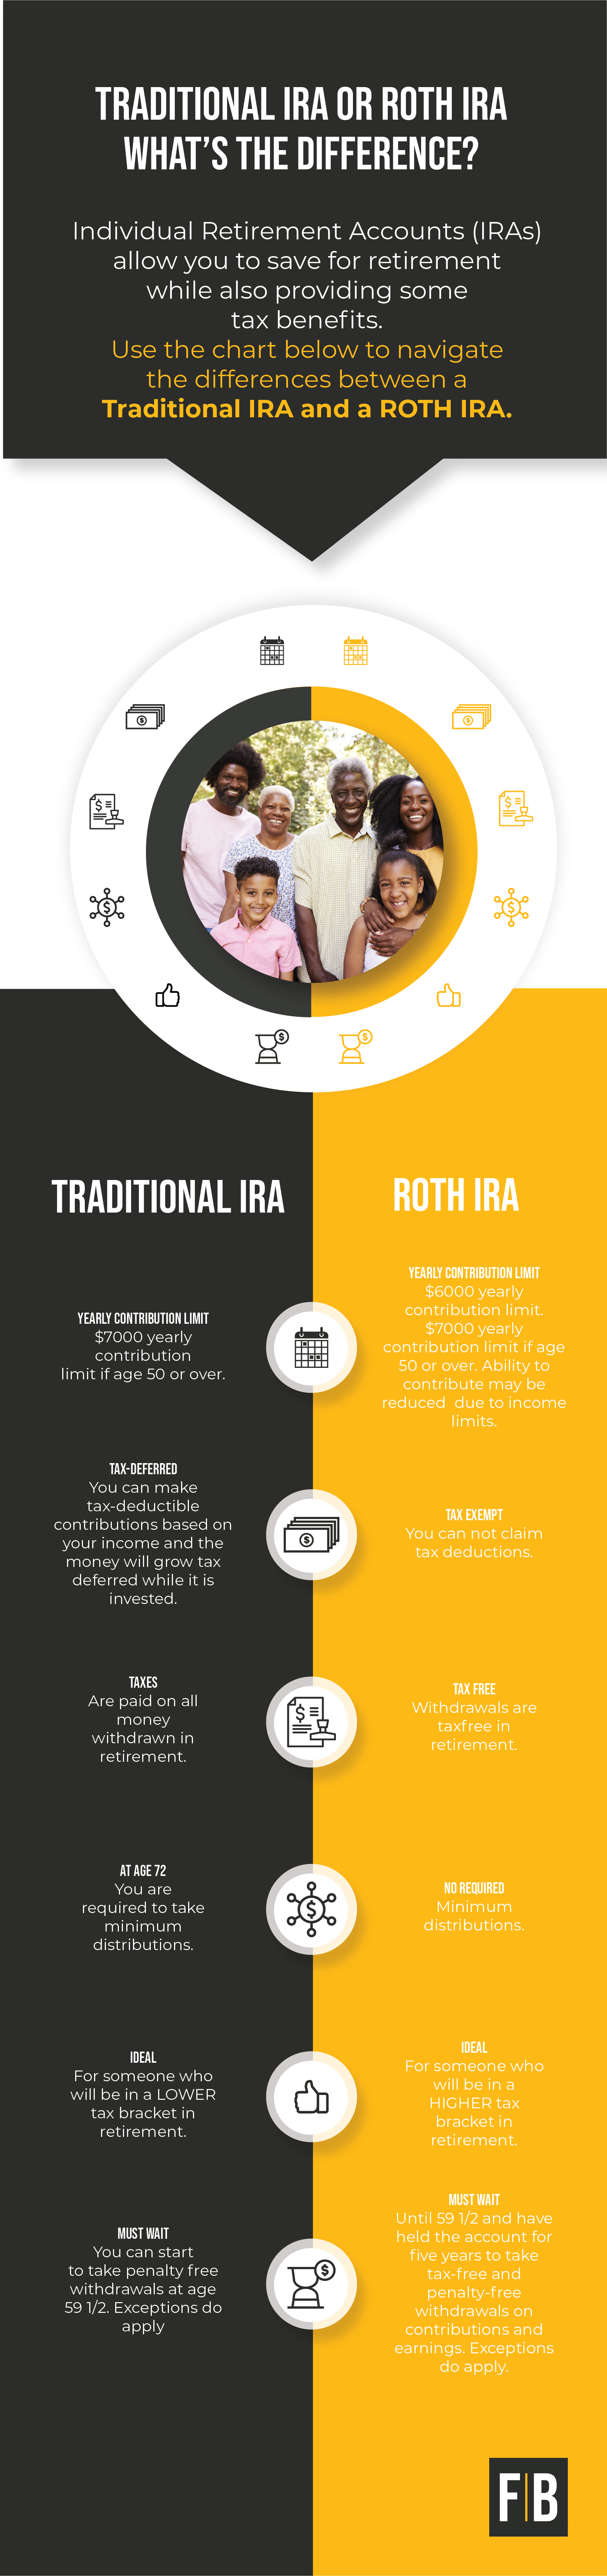 fTraditional vs Roth Infographic mobile format_Mobile_Format.png